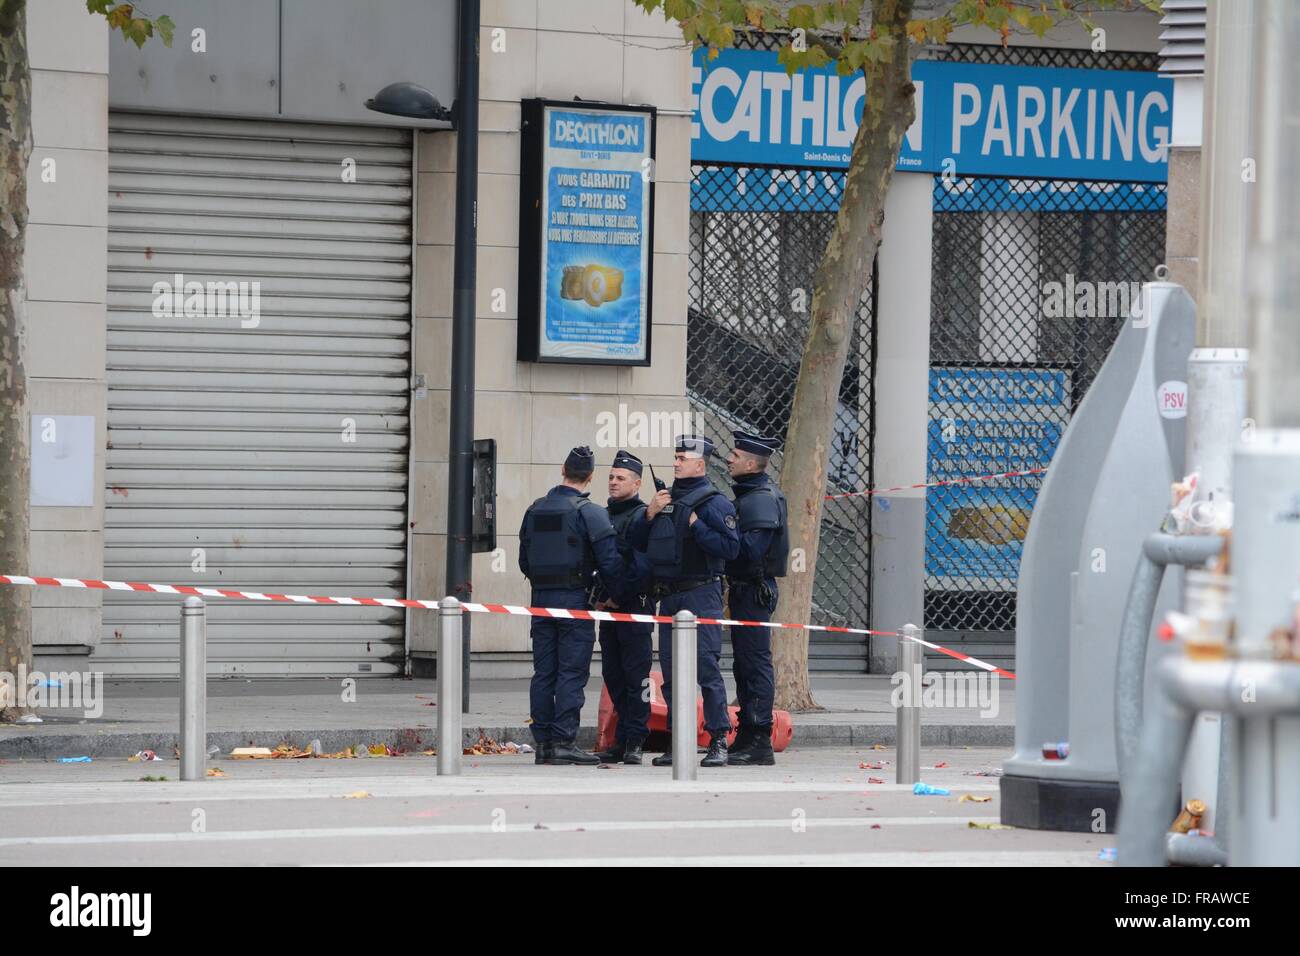 November 14th 2015. Paris, France. Police stand outside the Quick Burger restaurant. Blood can be seen spattered against the shutters and medical equipment strewn on the floor. ©Marc Ward/Alamy Stock Photo